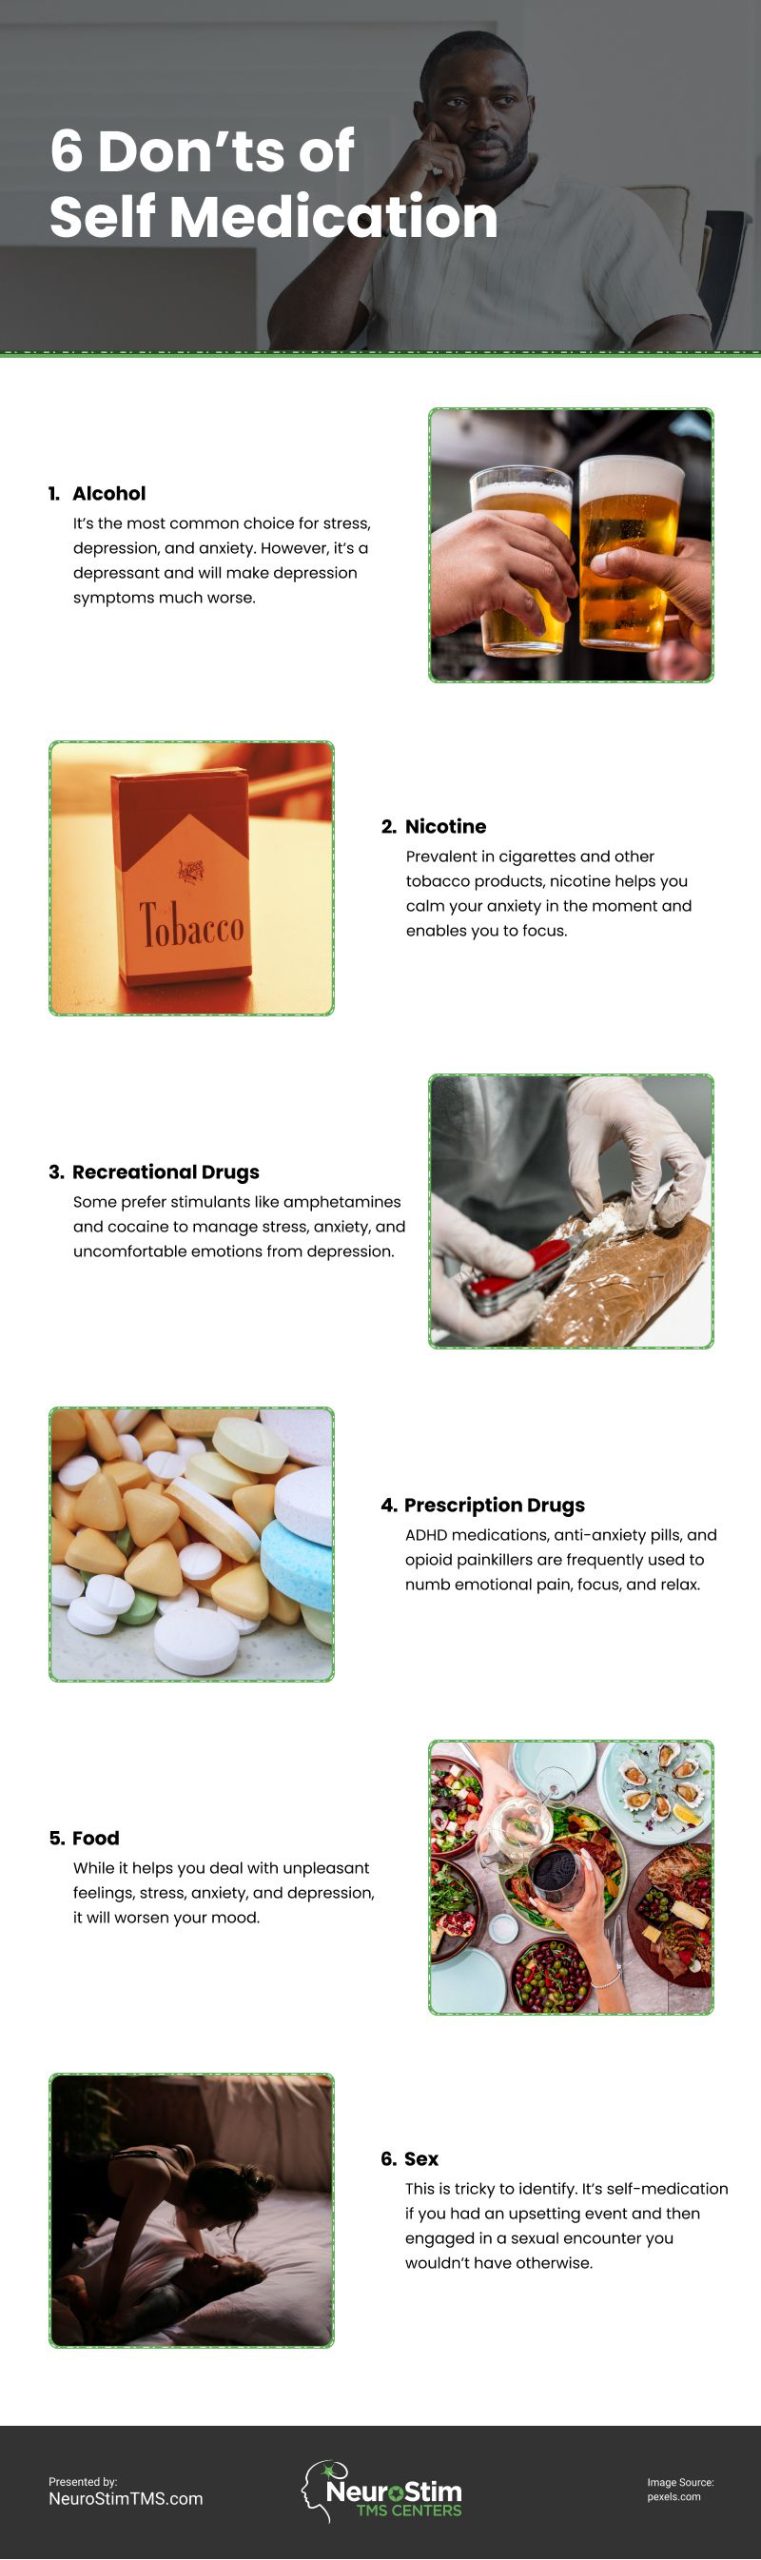 6 Don'ts of Self Medication Infographic